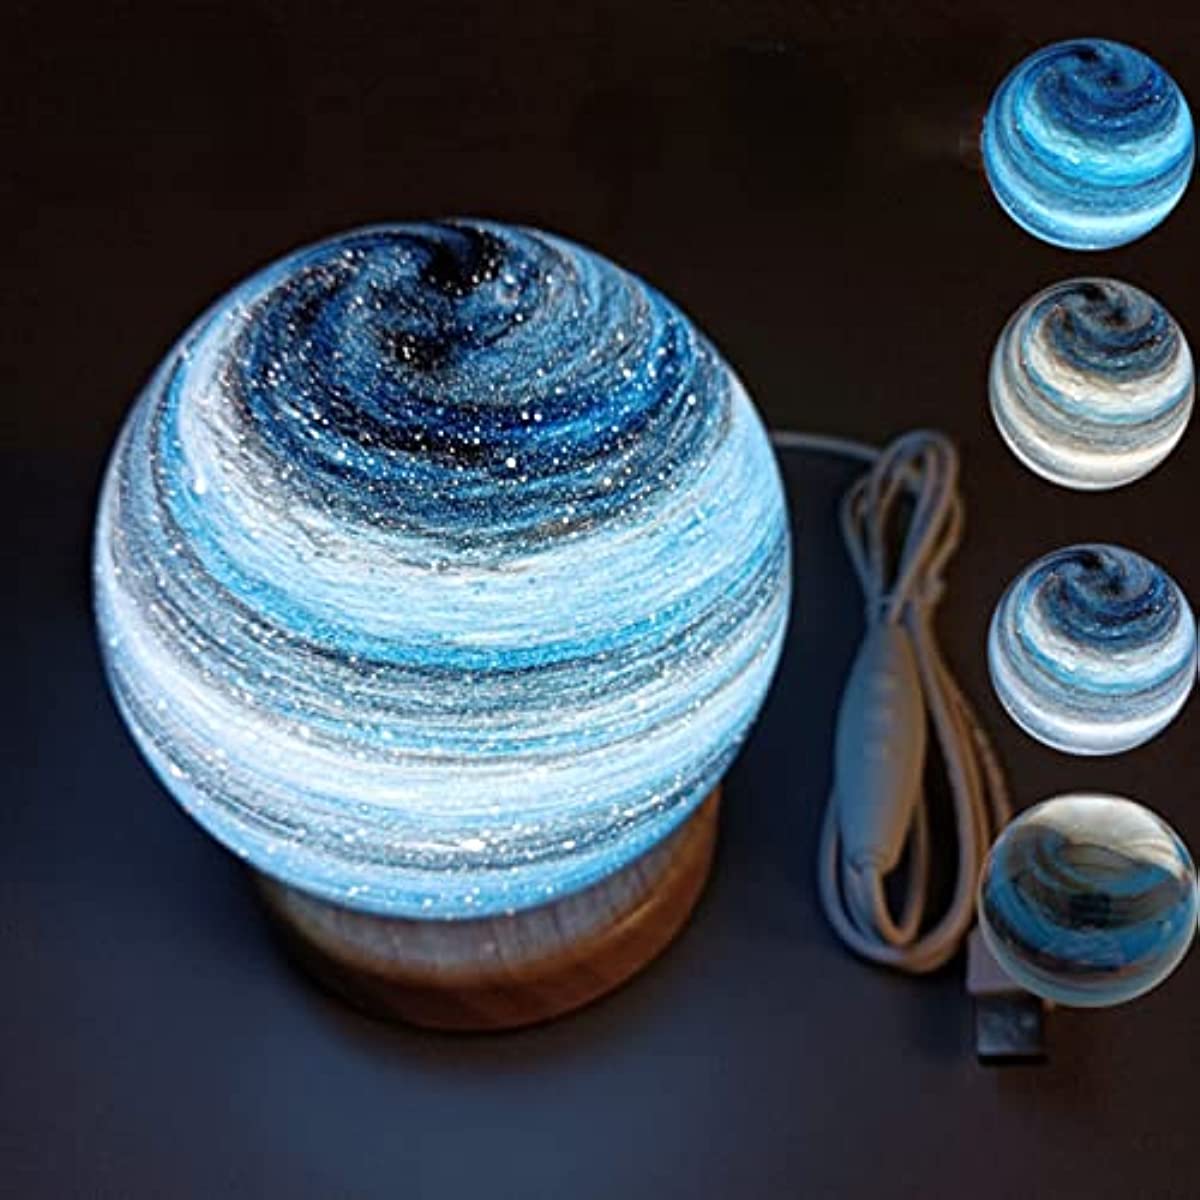 Light Up the Night with this Magical 3D Moon Glass Lamp - Perfect Gift for Kids, Girls, Boys, and Friends!